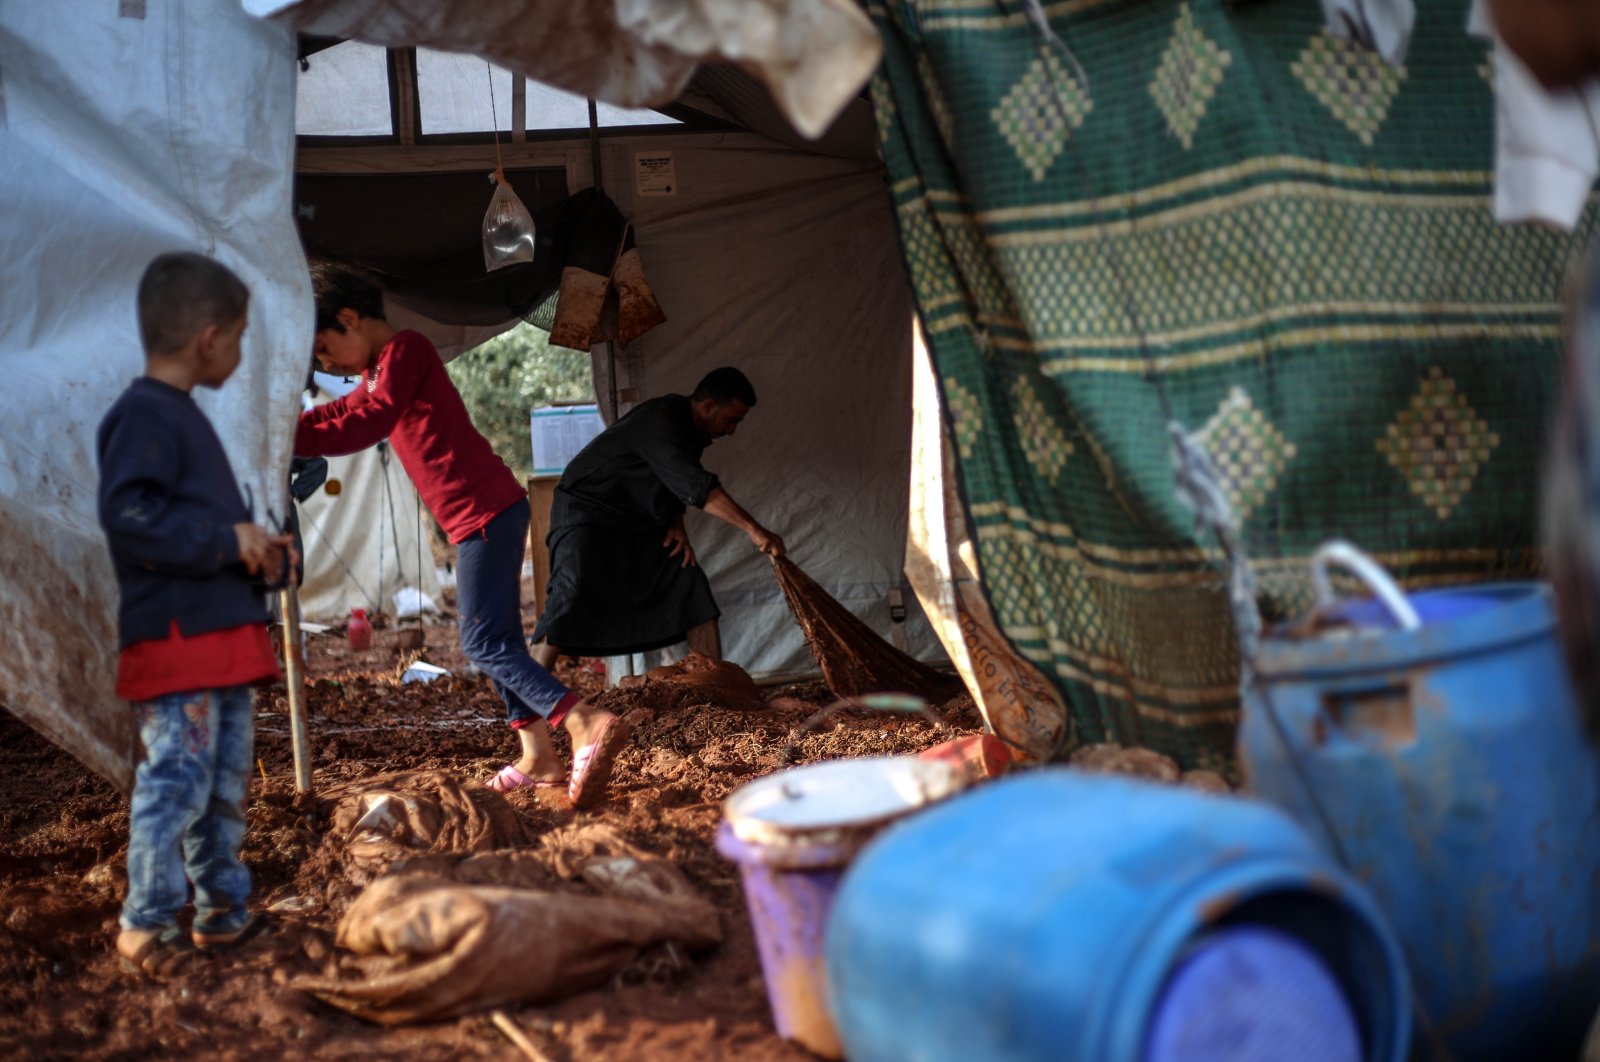 A displaced Syrian family is seen clearing mud from their tent after heavy rains caused devastating damage in camps in northwestern Syria, June 19, 2020. (AA Photo)